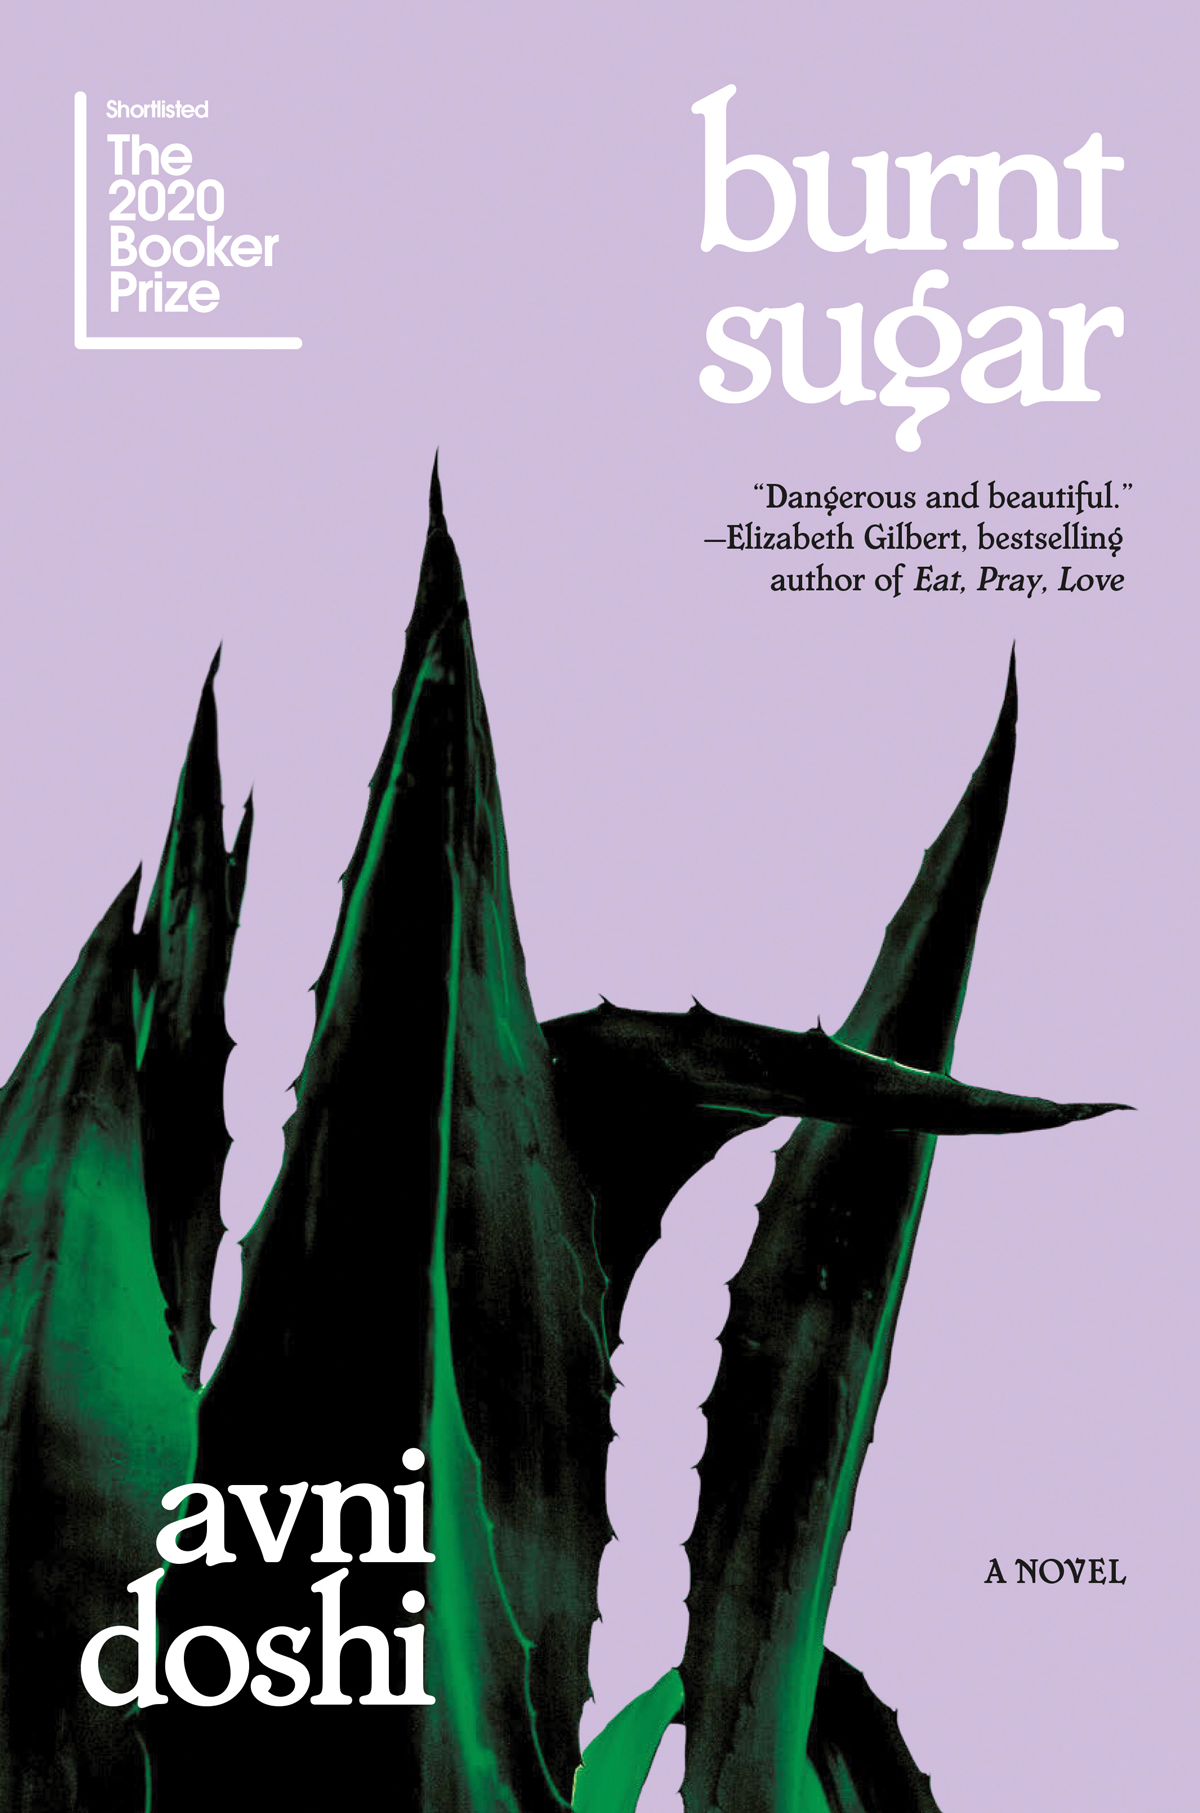 Cover for the book "Burnt Sugar" which has an aloe plant on a lavender background